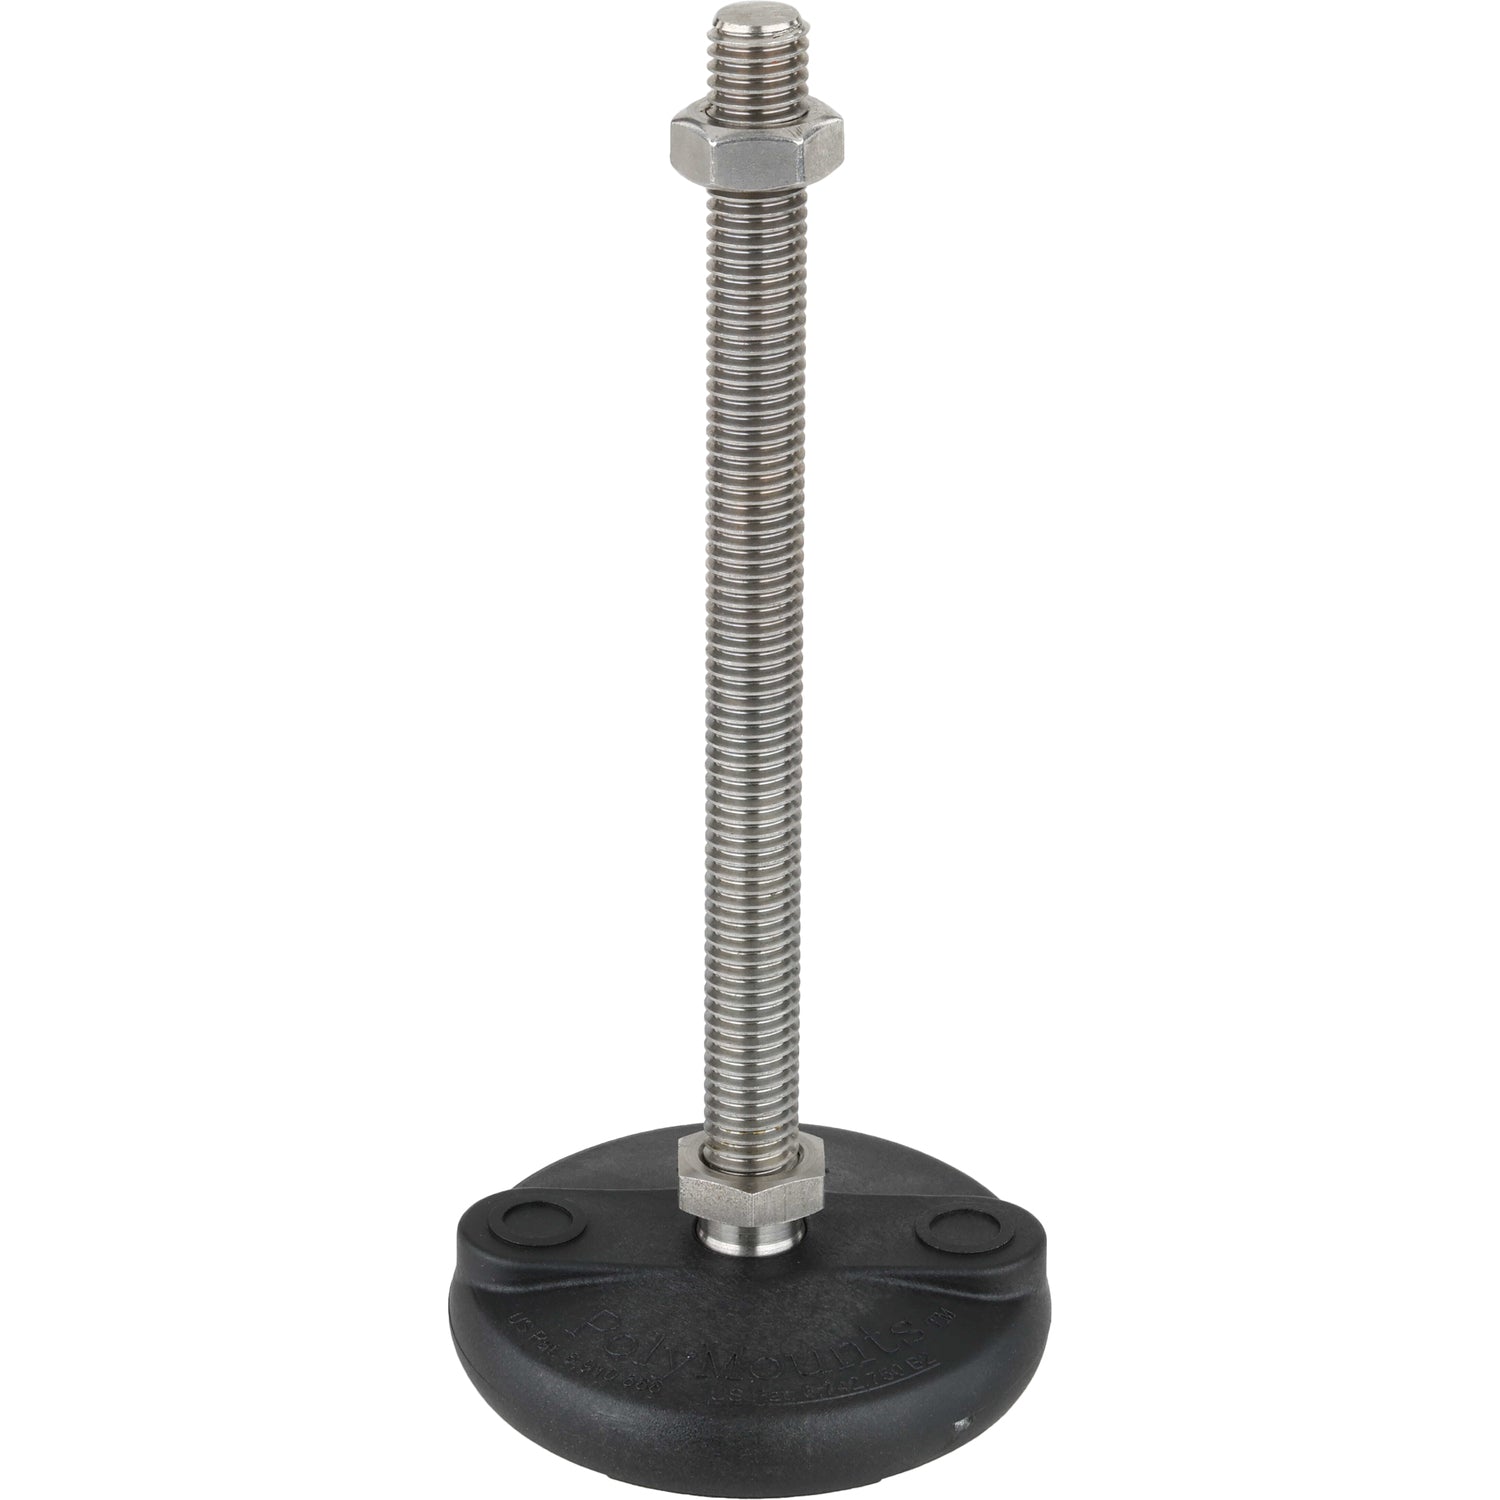 Threaded stainless steel post with stainless steel hex nut threaded on top, pressed into a circular black plastic base. Shown on a white background. 